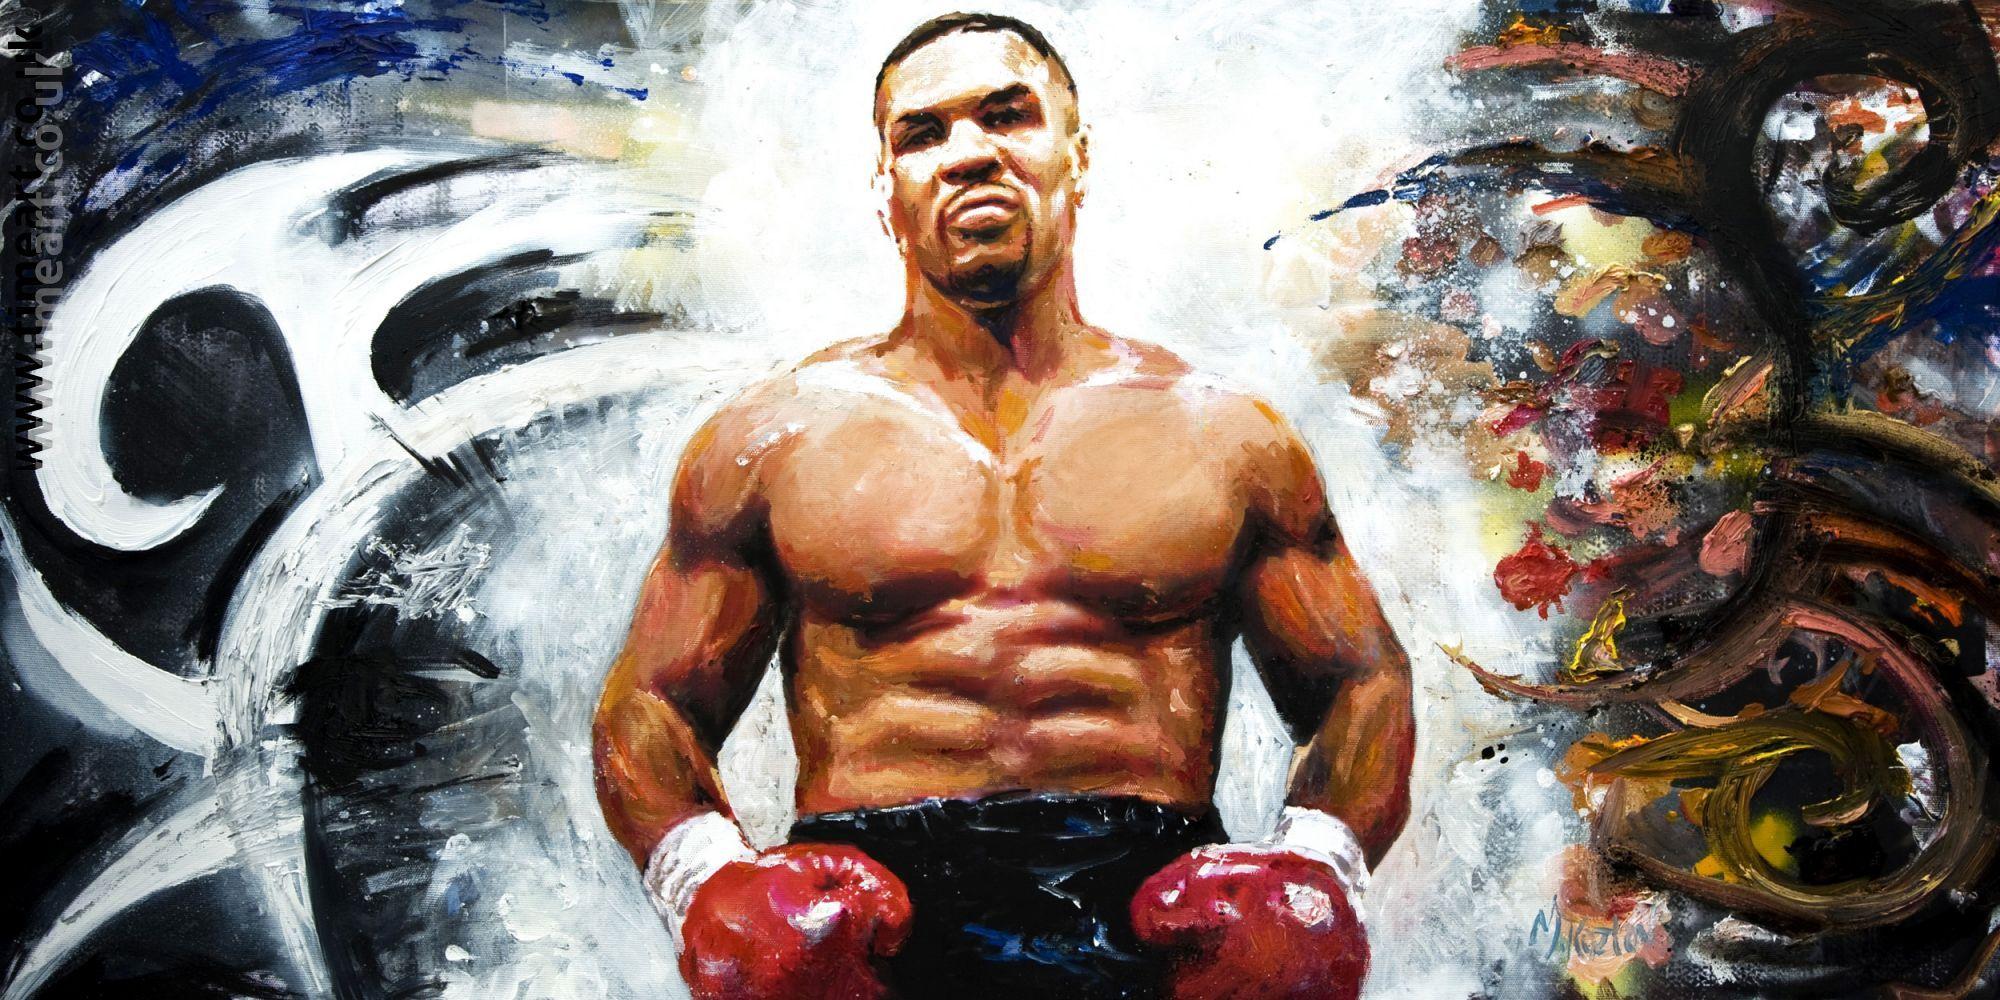 2000 x 1000 · jpeg - Mike Tyson Wallpapers, Pictures, Images | Mike tyson, Boxing posters, Tyson